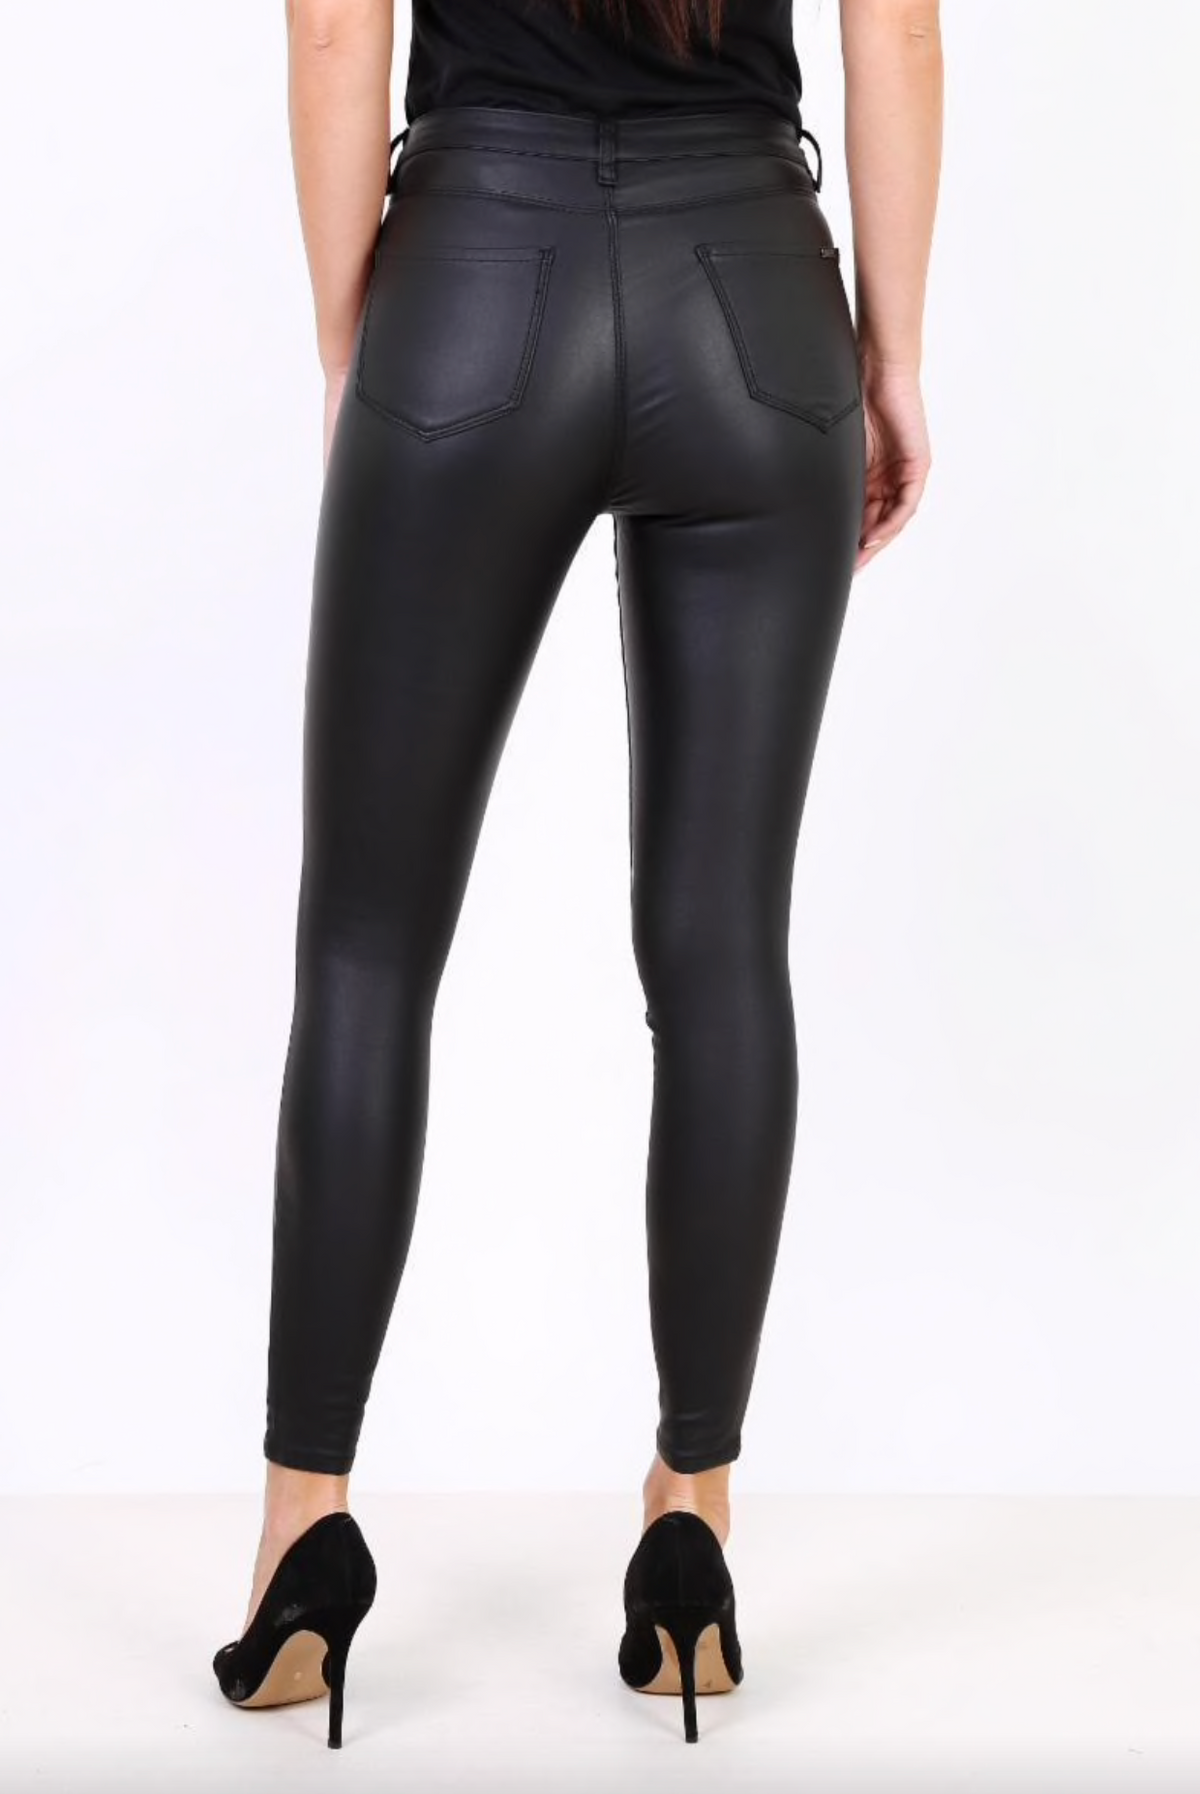 Toxik Black Ava HighWaisted Bum Lift Wax Coated Jeans freeshipping - Ruby 67 Boutique